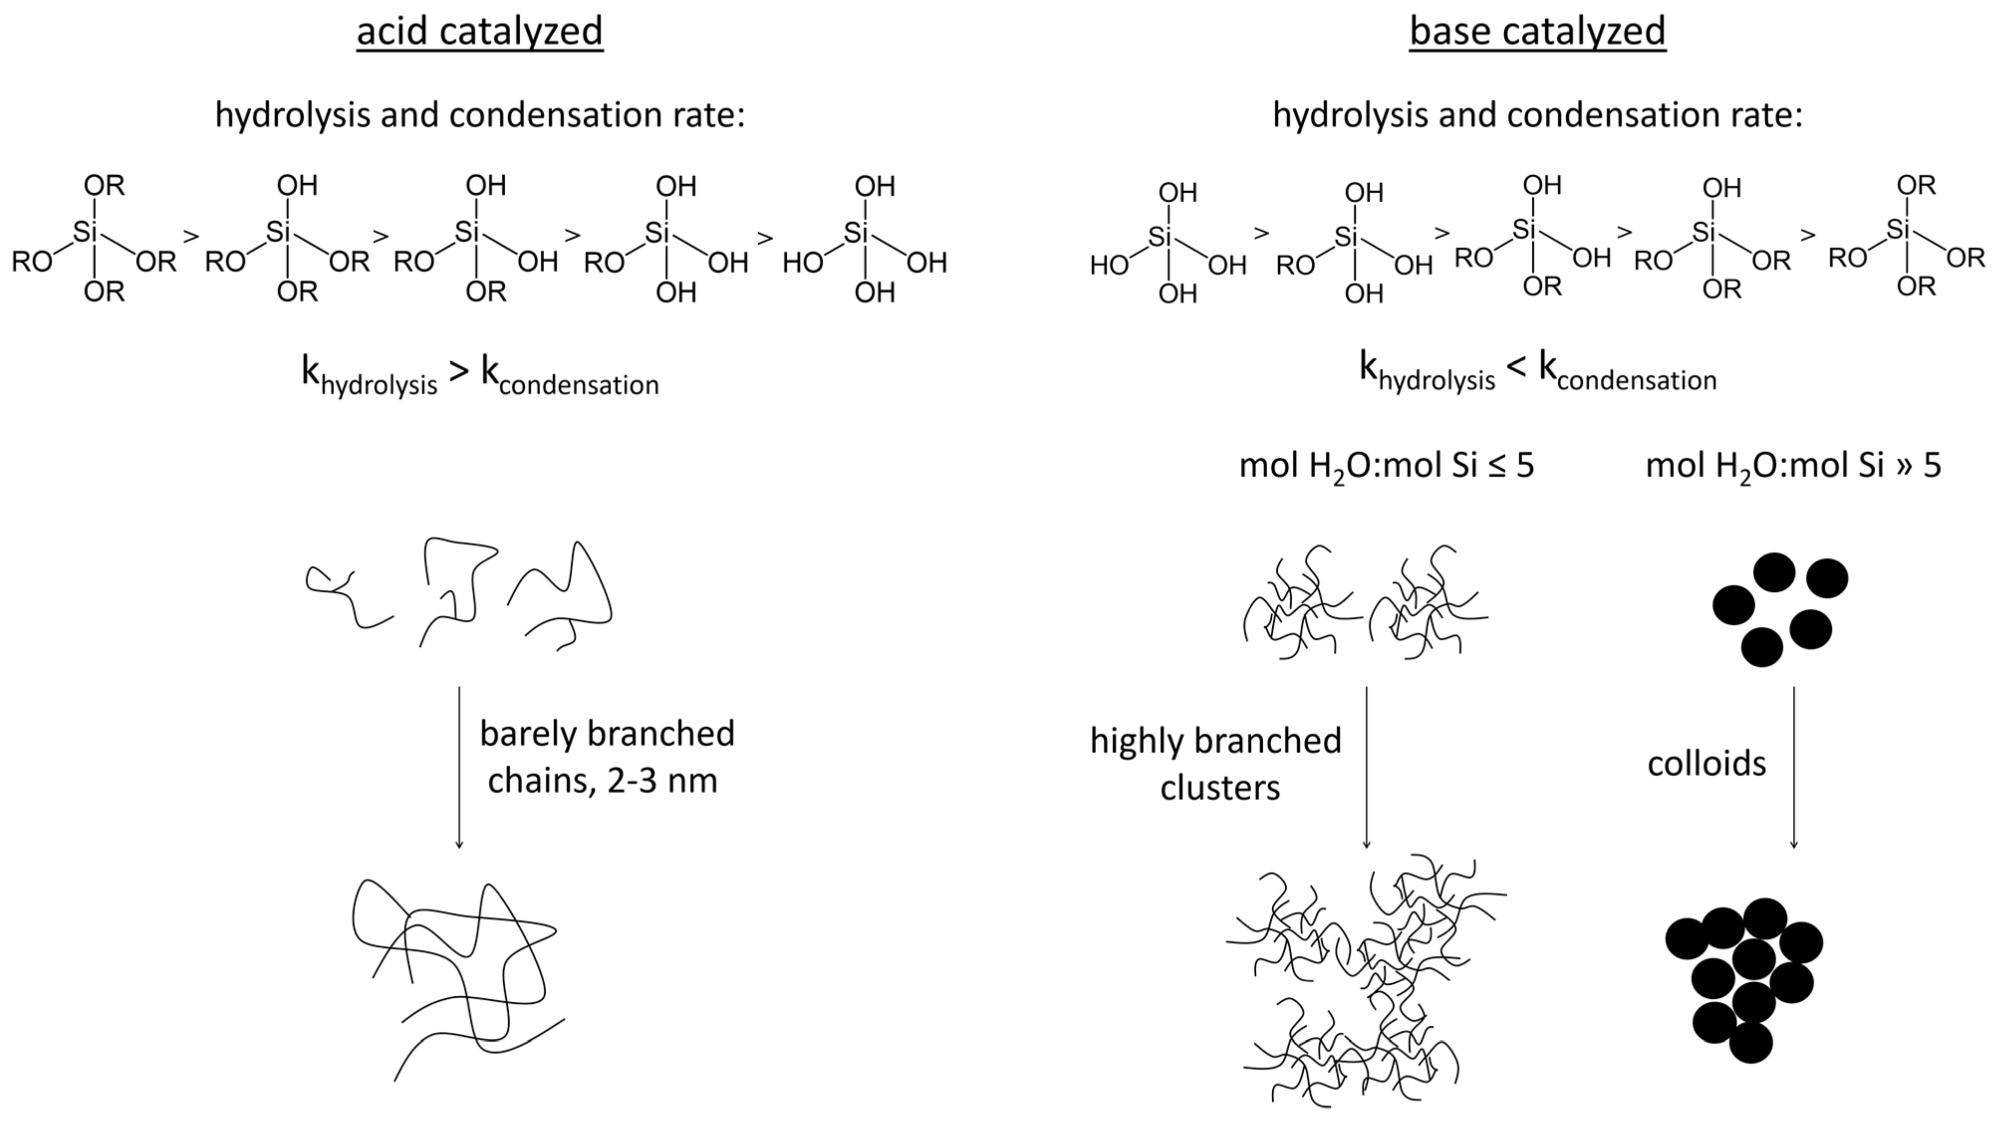 Schematic presentation of hydrolysis and condensation of alkoxysilanes under acidic and alkaline conditions, modified from [58,60,61,63].